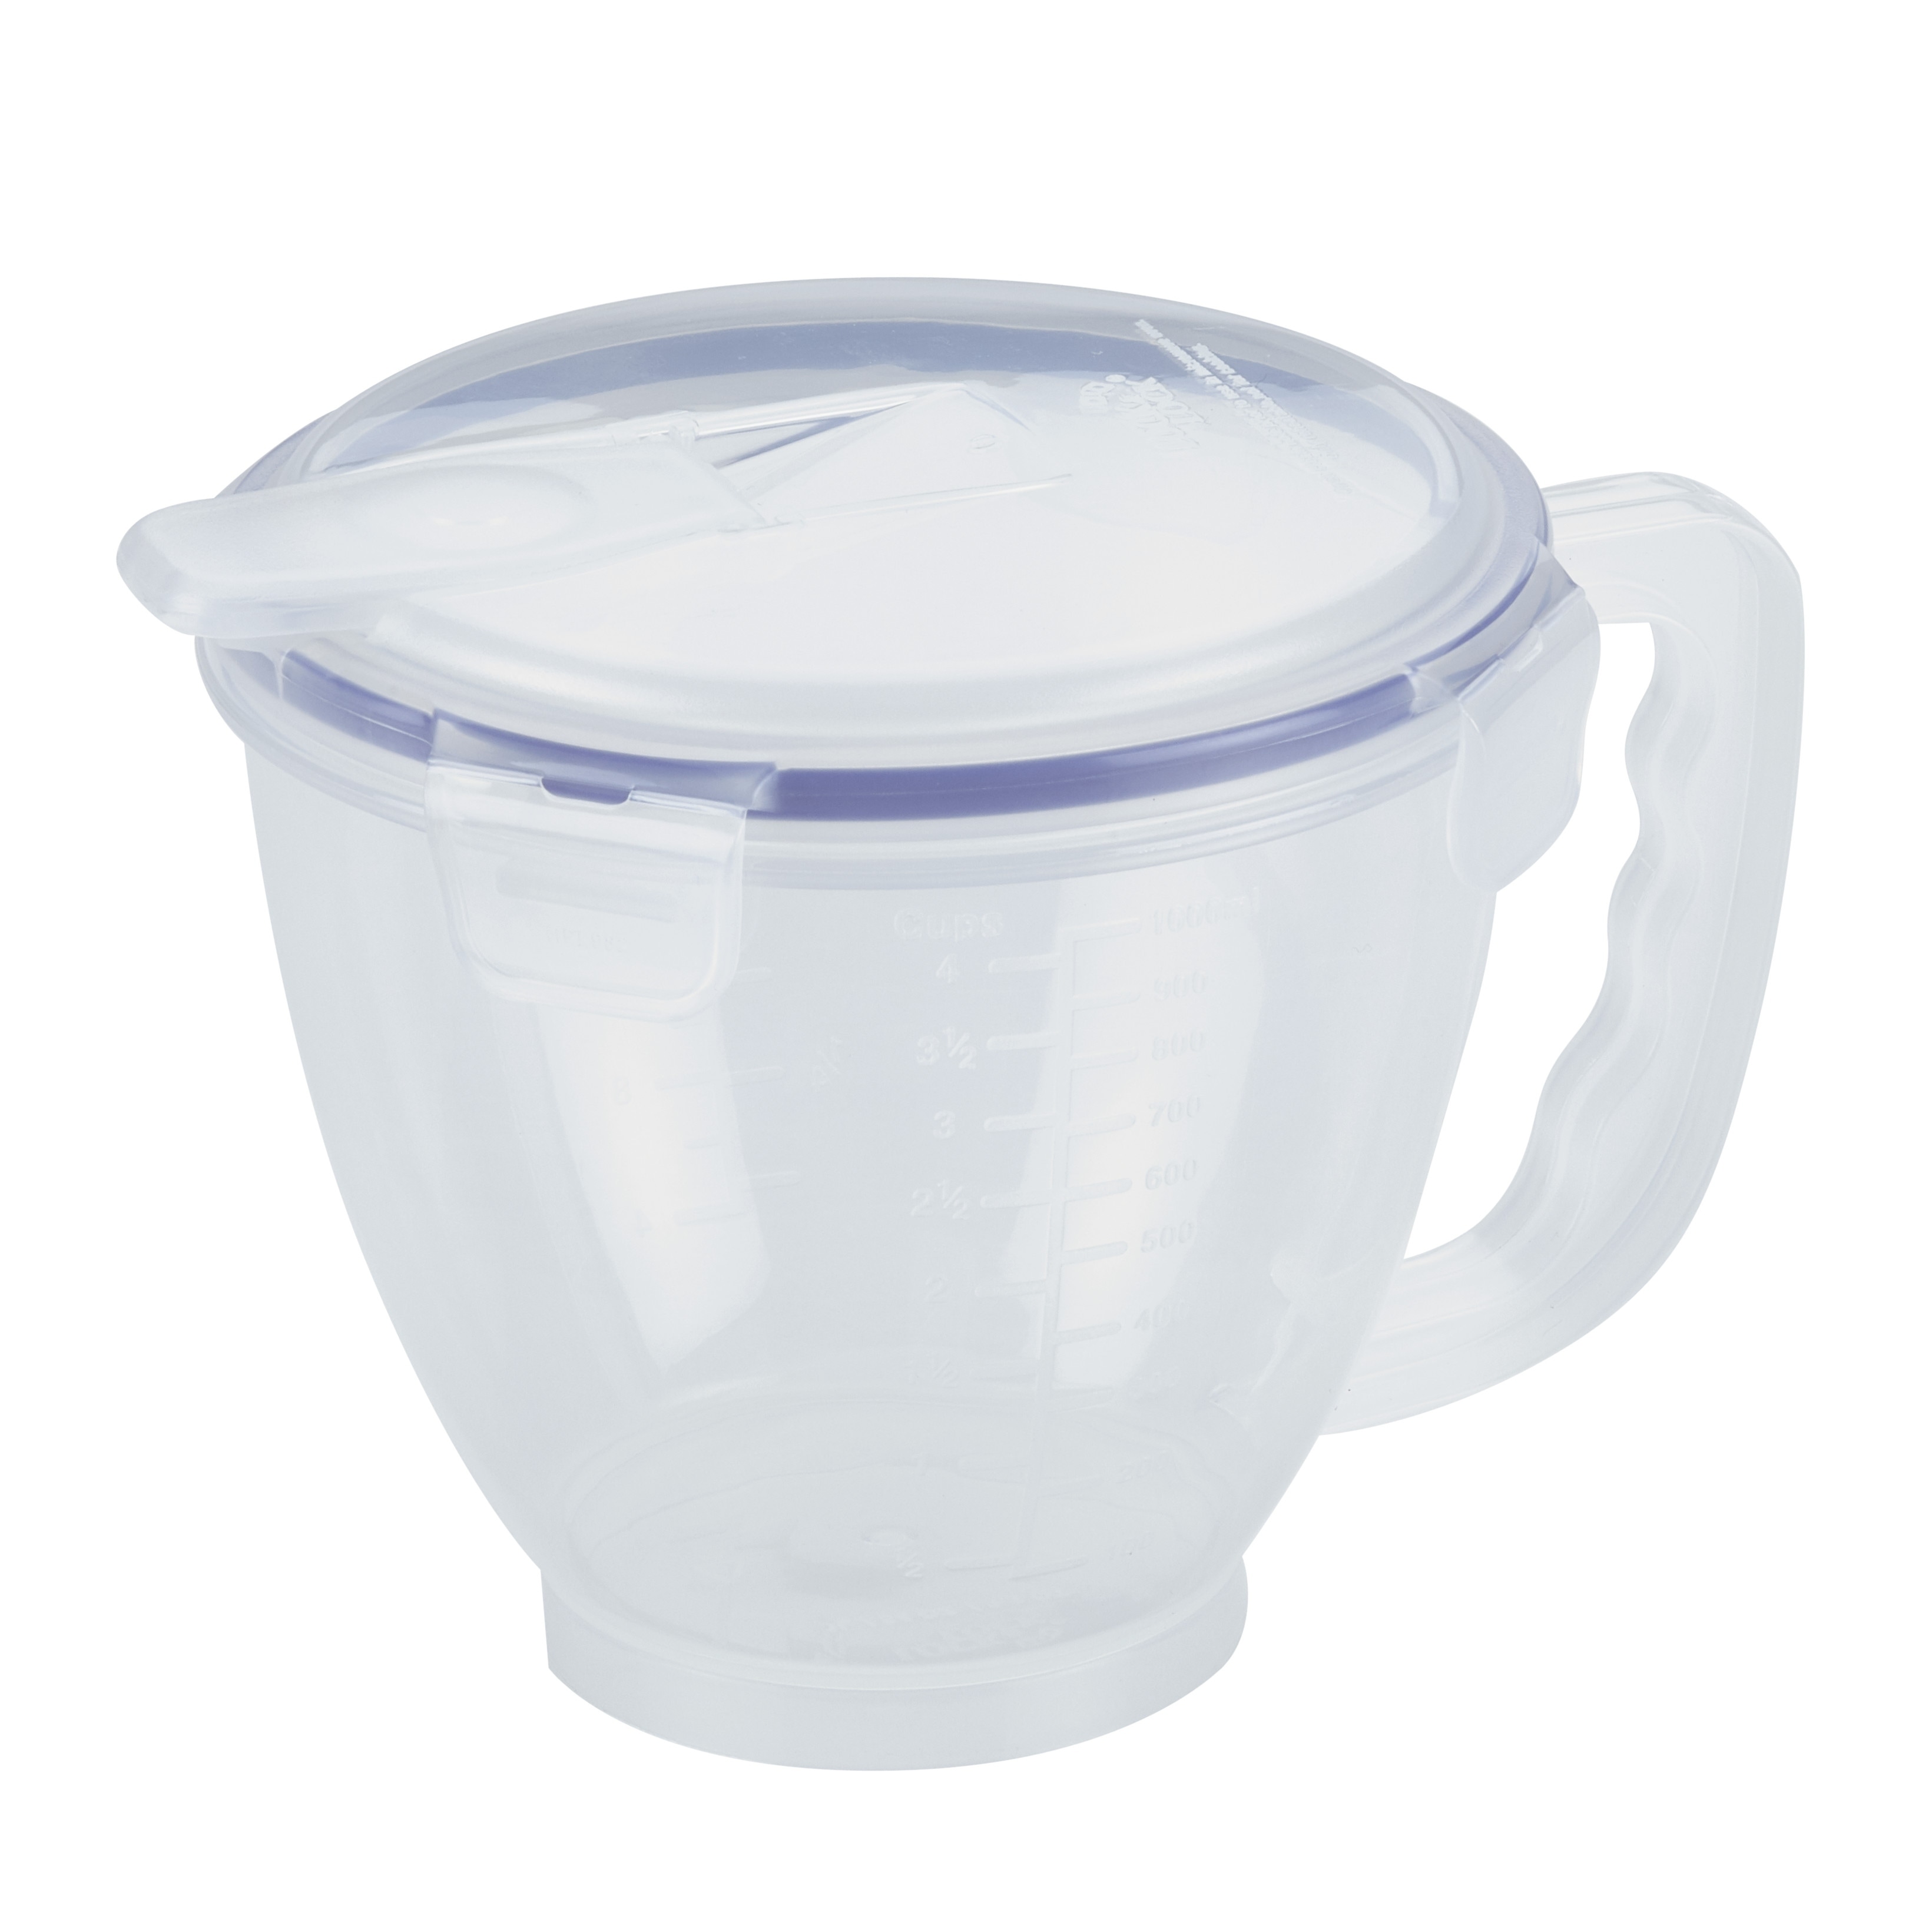 https://ak1.ostkcdn.com/images/products/29013375/Easy-Essentials-Specialty-Measuring-Cup-1-Liter-998be766-8f7d-403b-b14d-c1b7eb001fcd.jpg